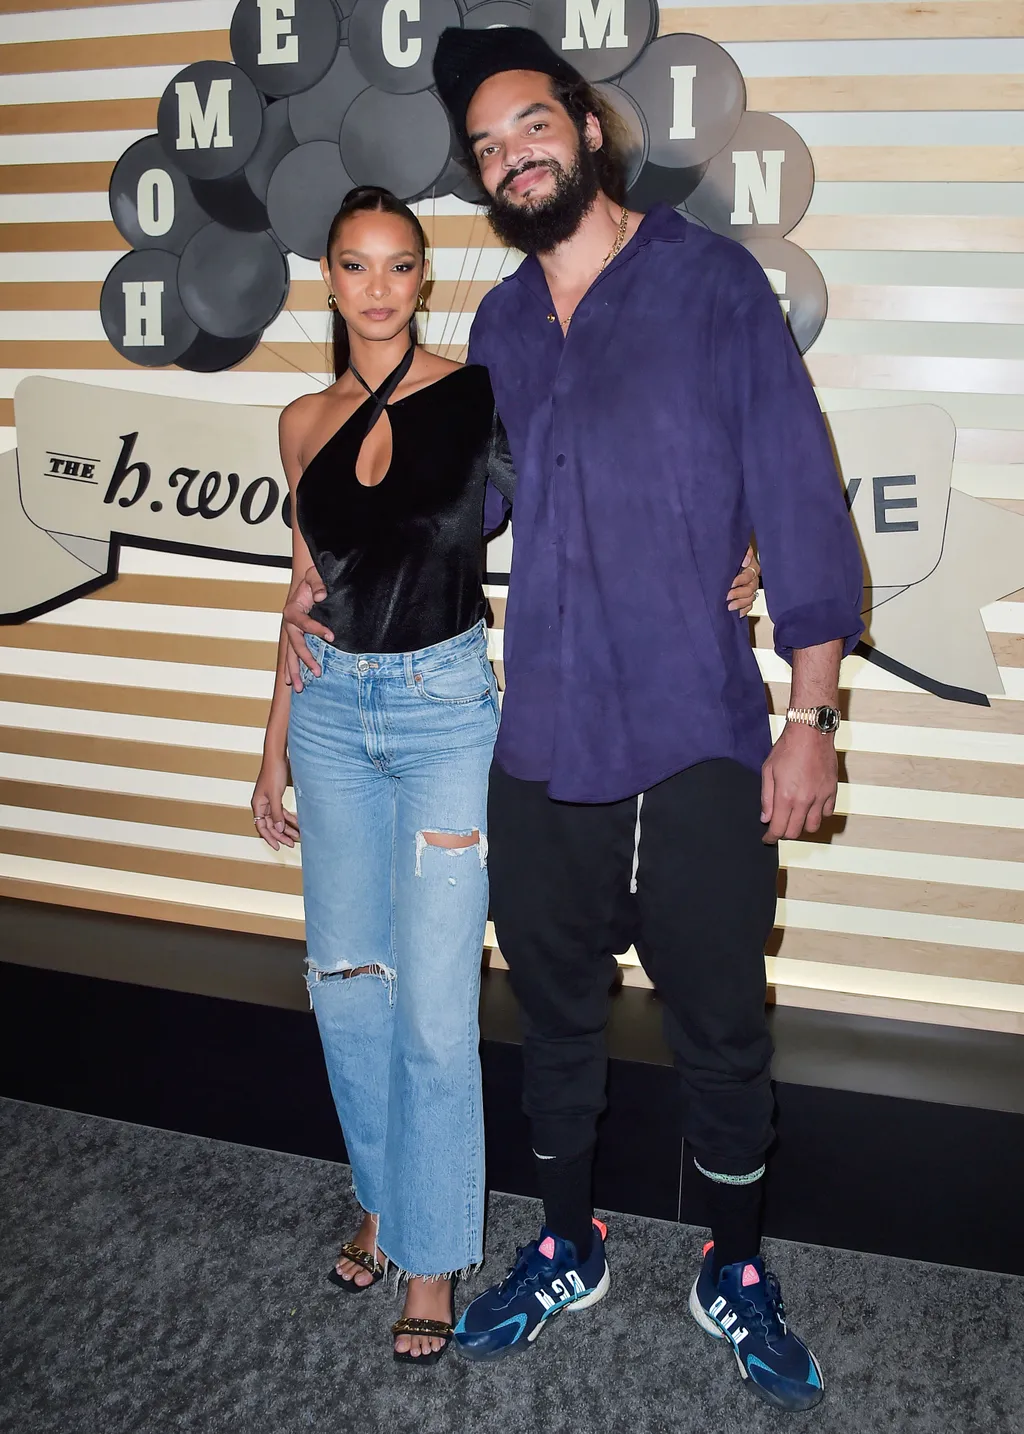 'Homecoming Weekend' Featuring Drake Hosted By The h.wood Group And REVOLVE USA United States IDSOK America NurPhoto California CA LA West Coast Los Angeles Hollywood West Hollywood County Arts Culture Editorial Arrivals Attending Celebrities Posing 2022 